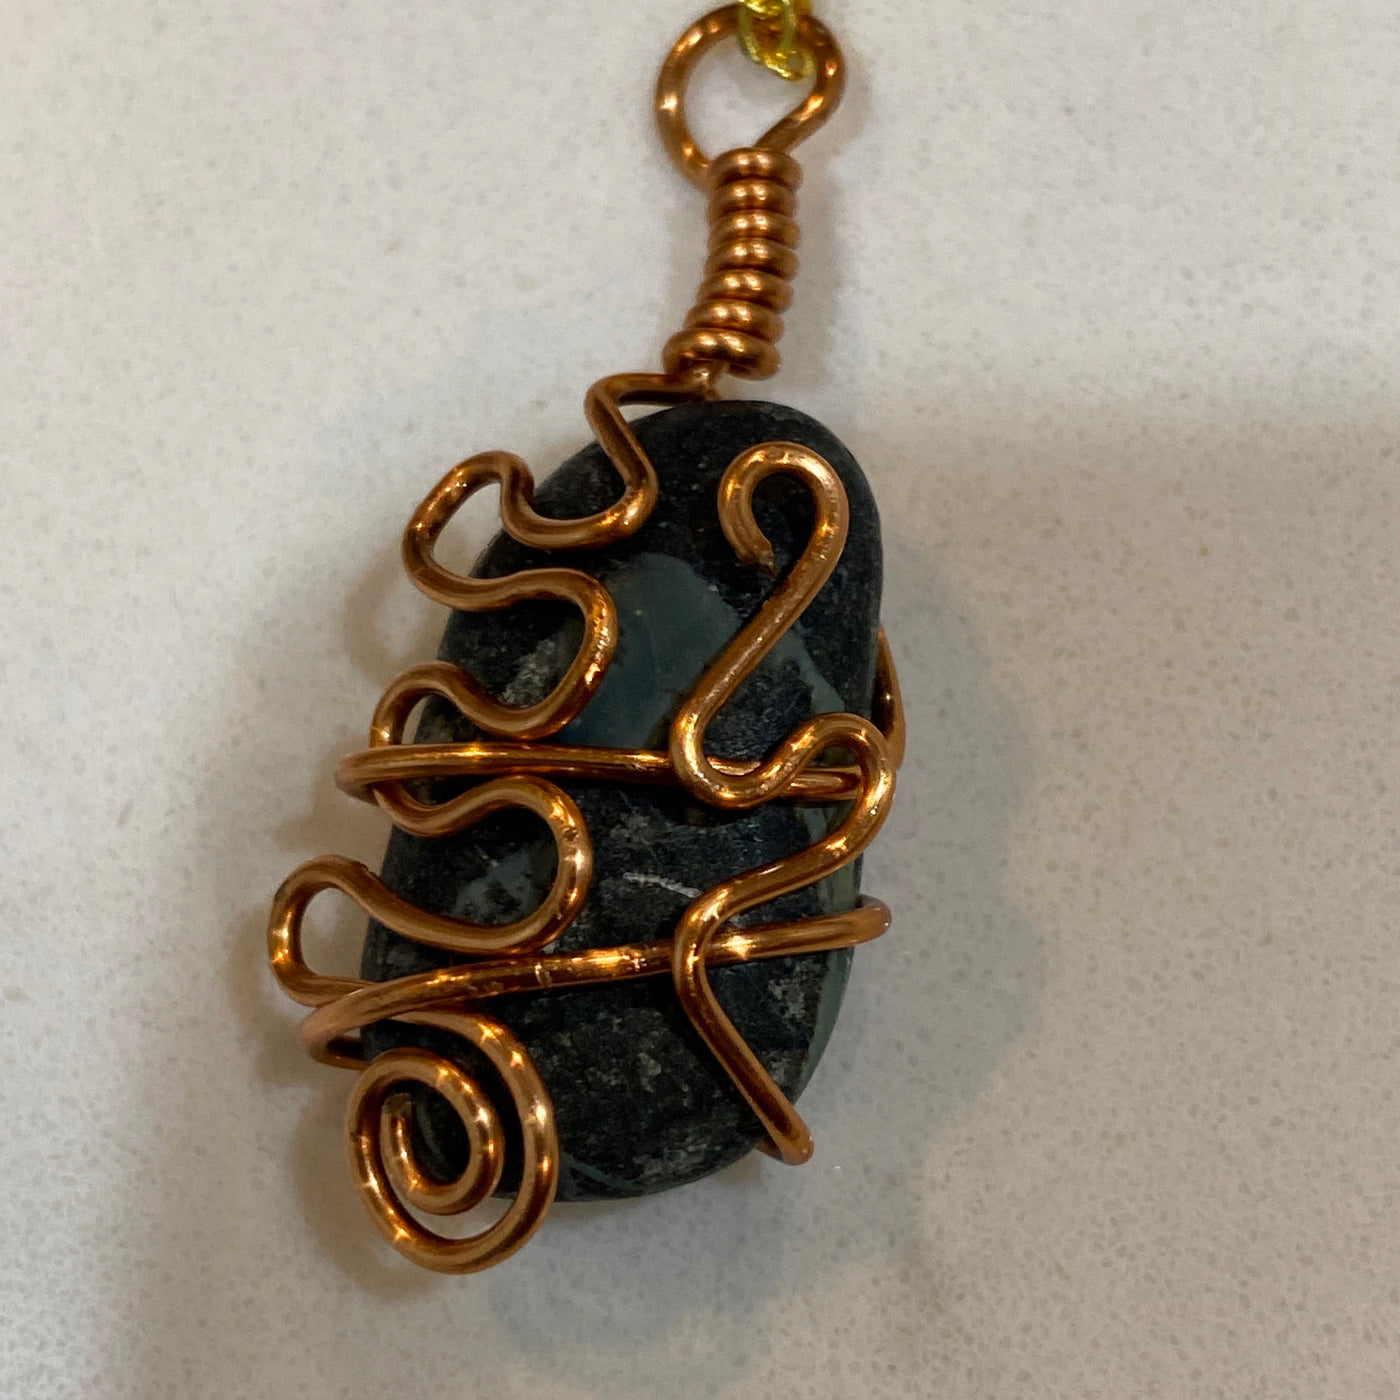 Black stone and wire. Small pendant for this shiny gorgeous stone.